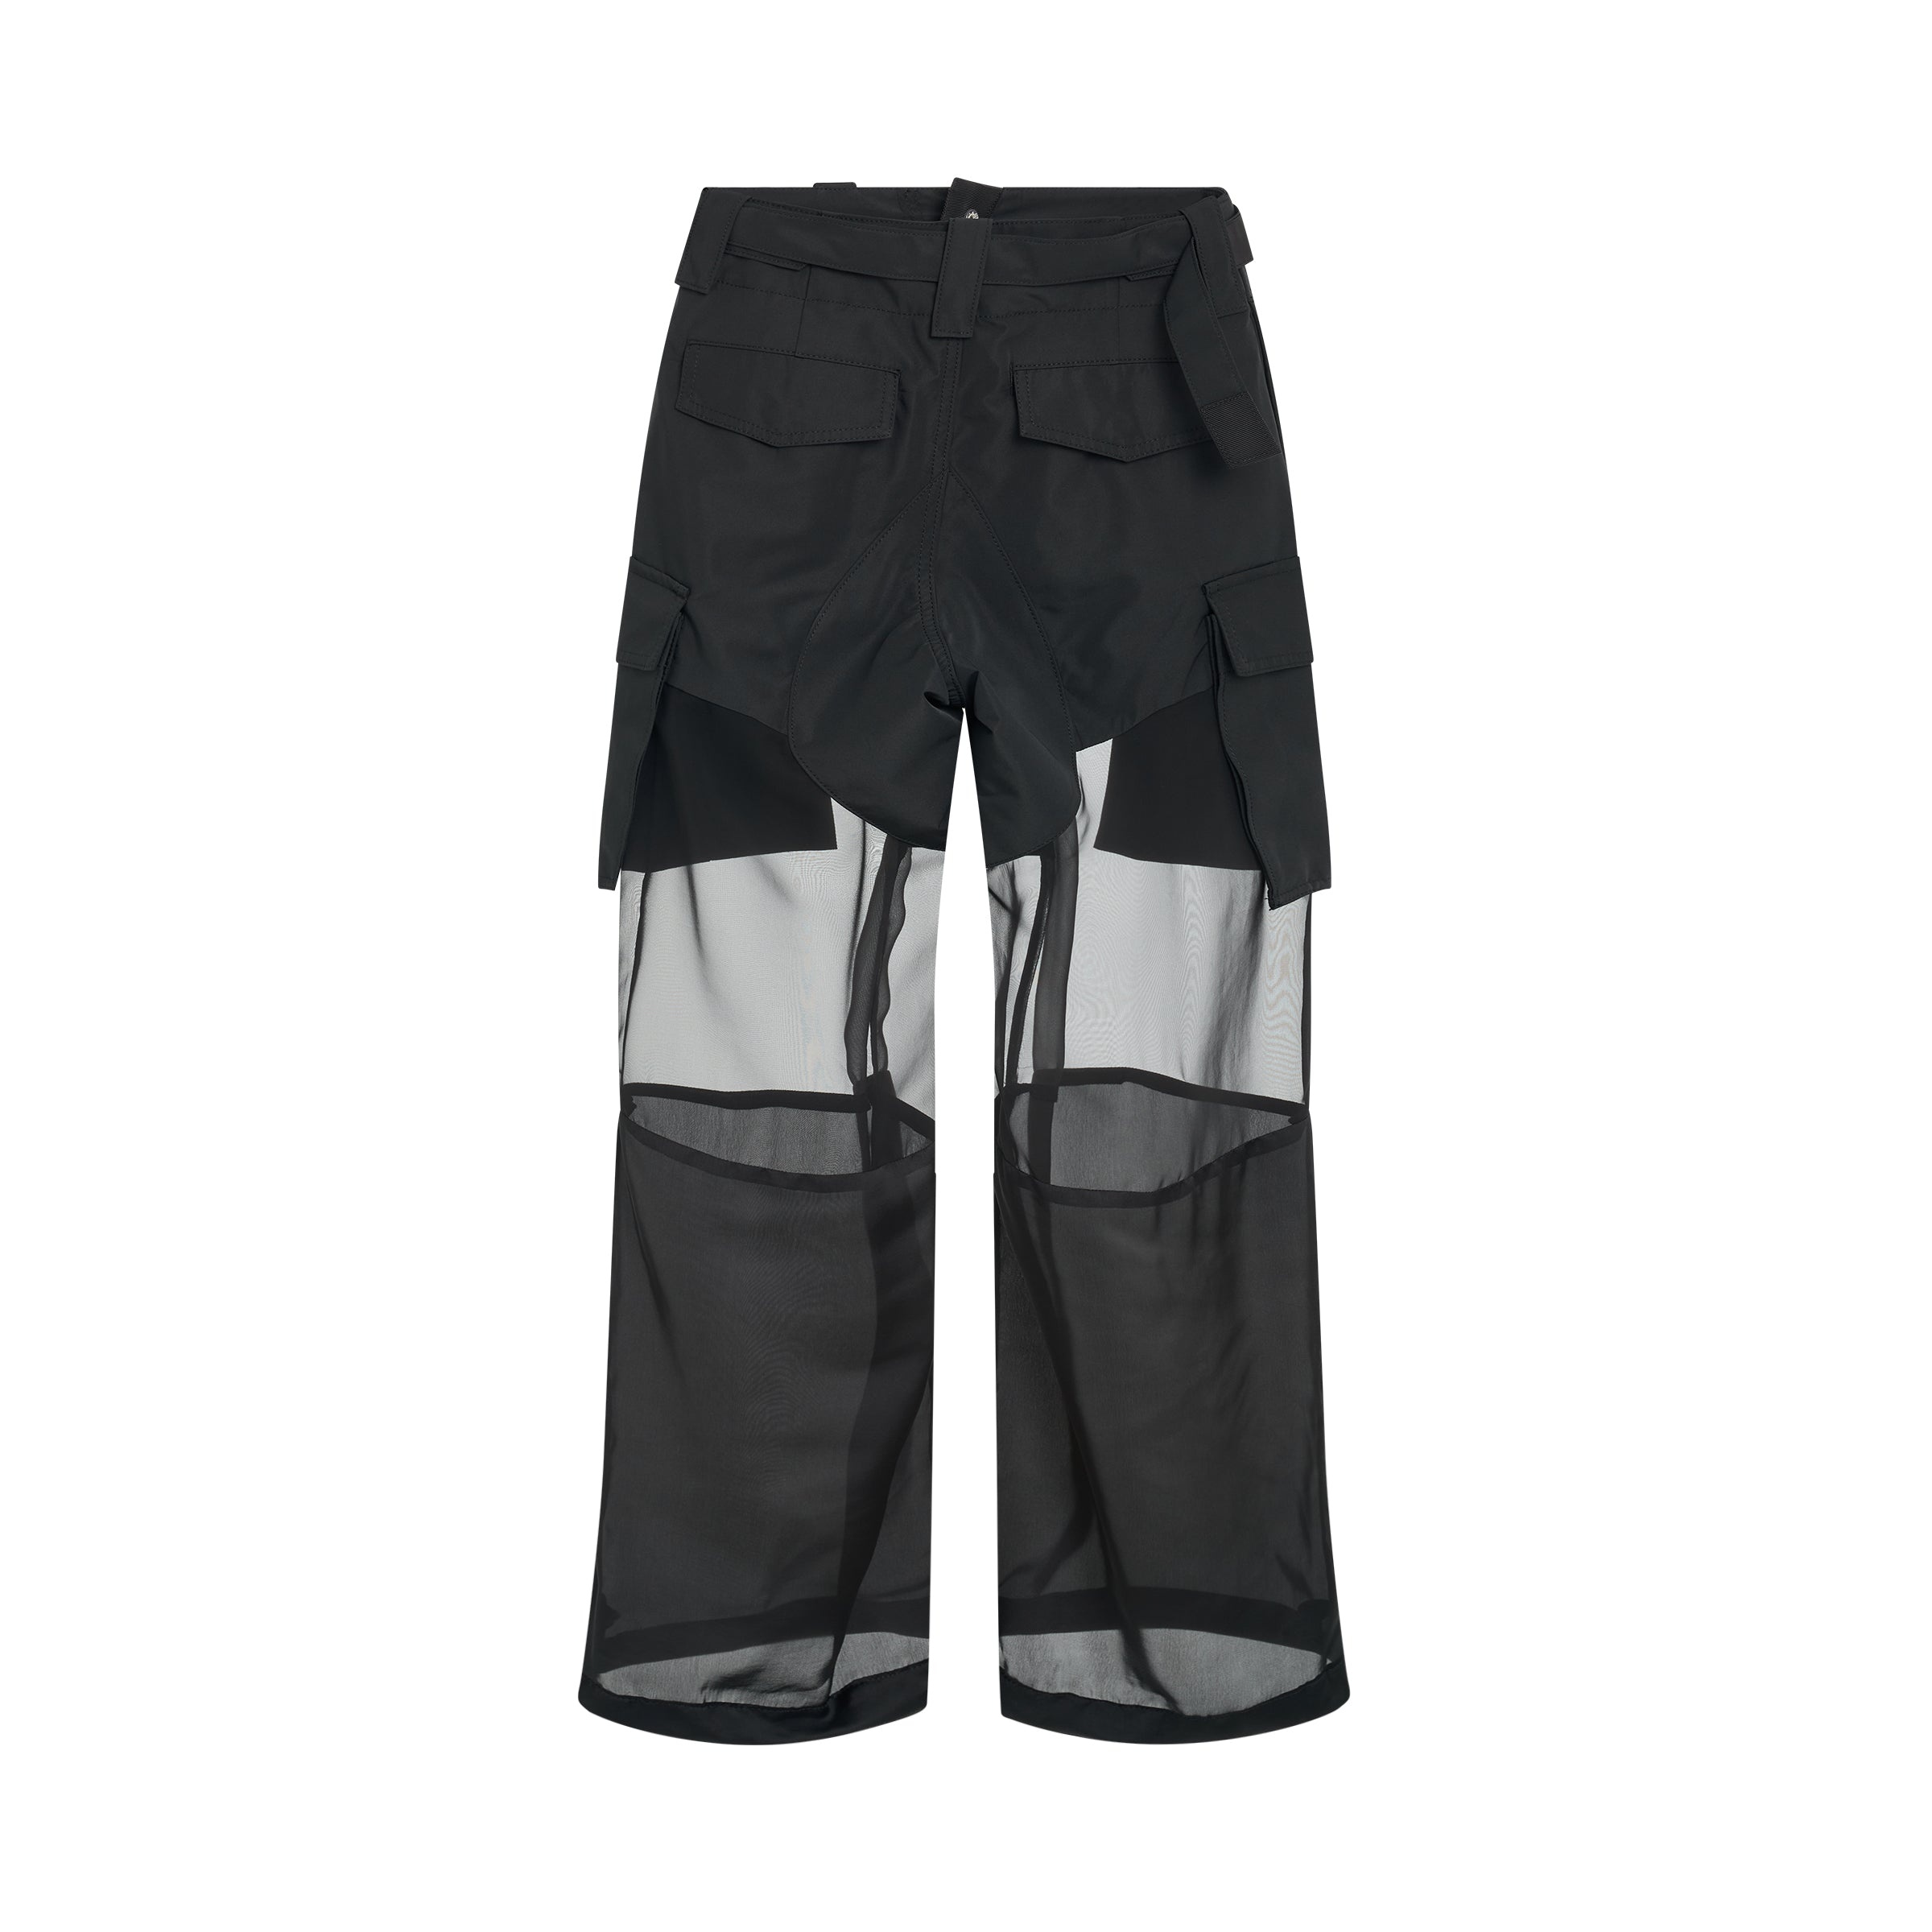 Fabric Combo Pants in Black - 2